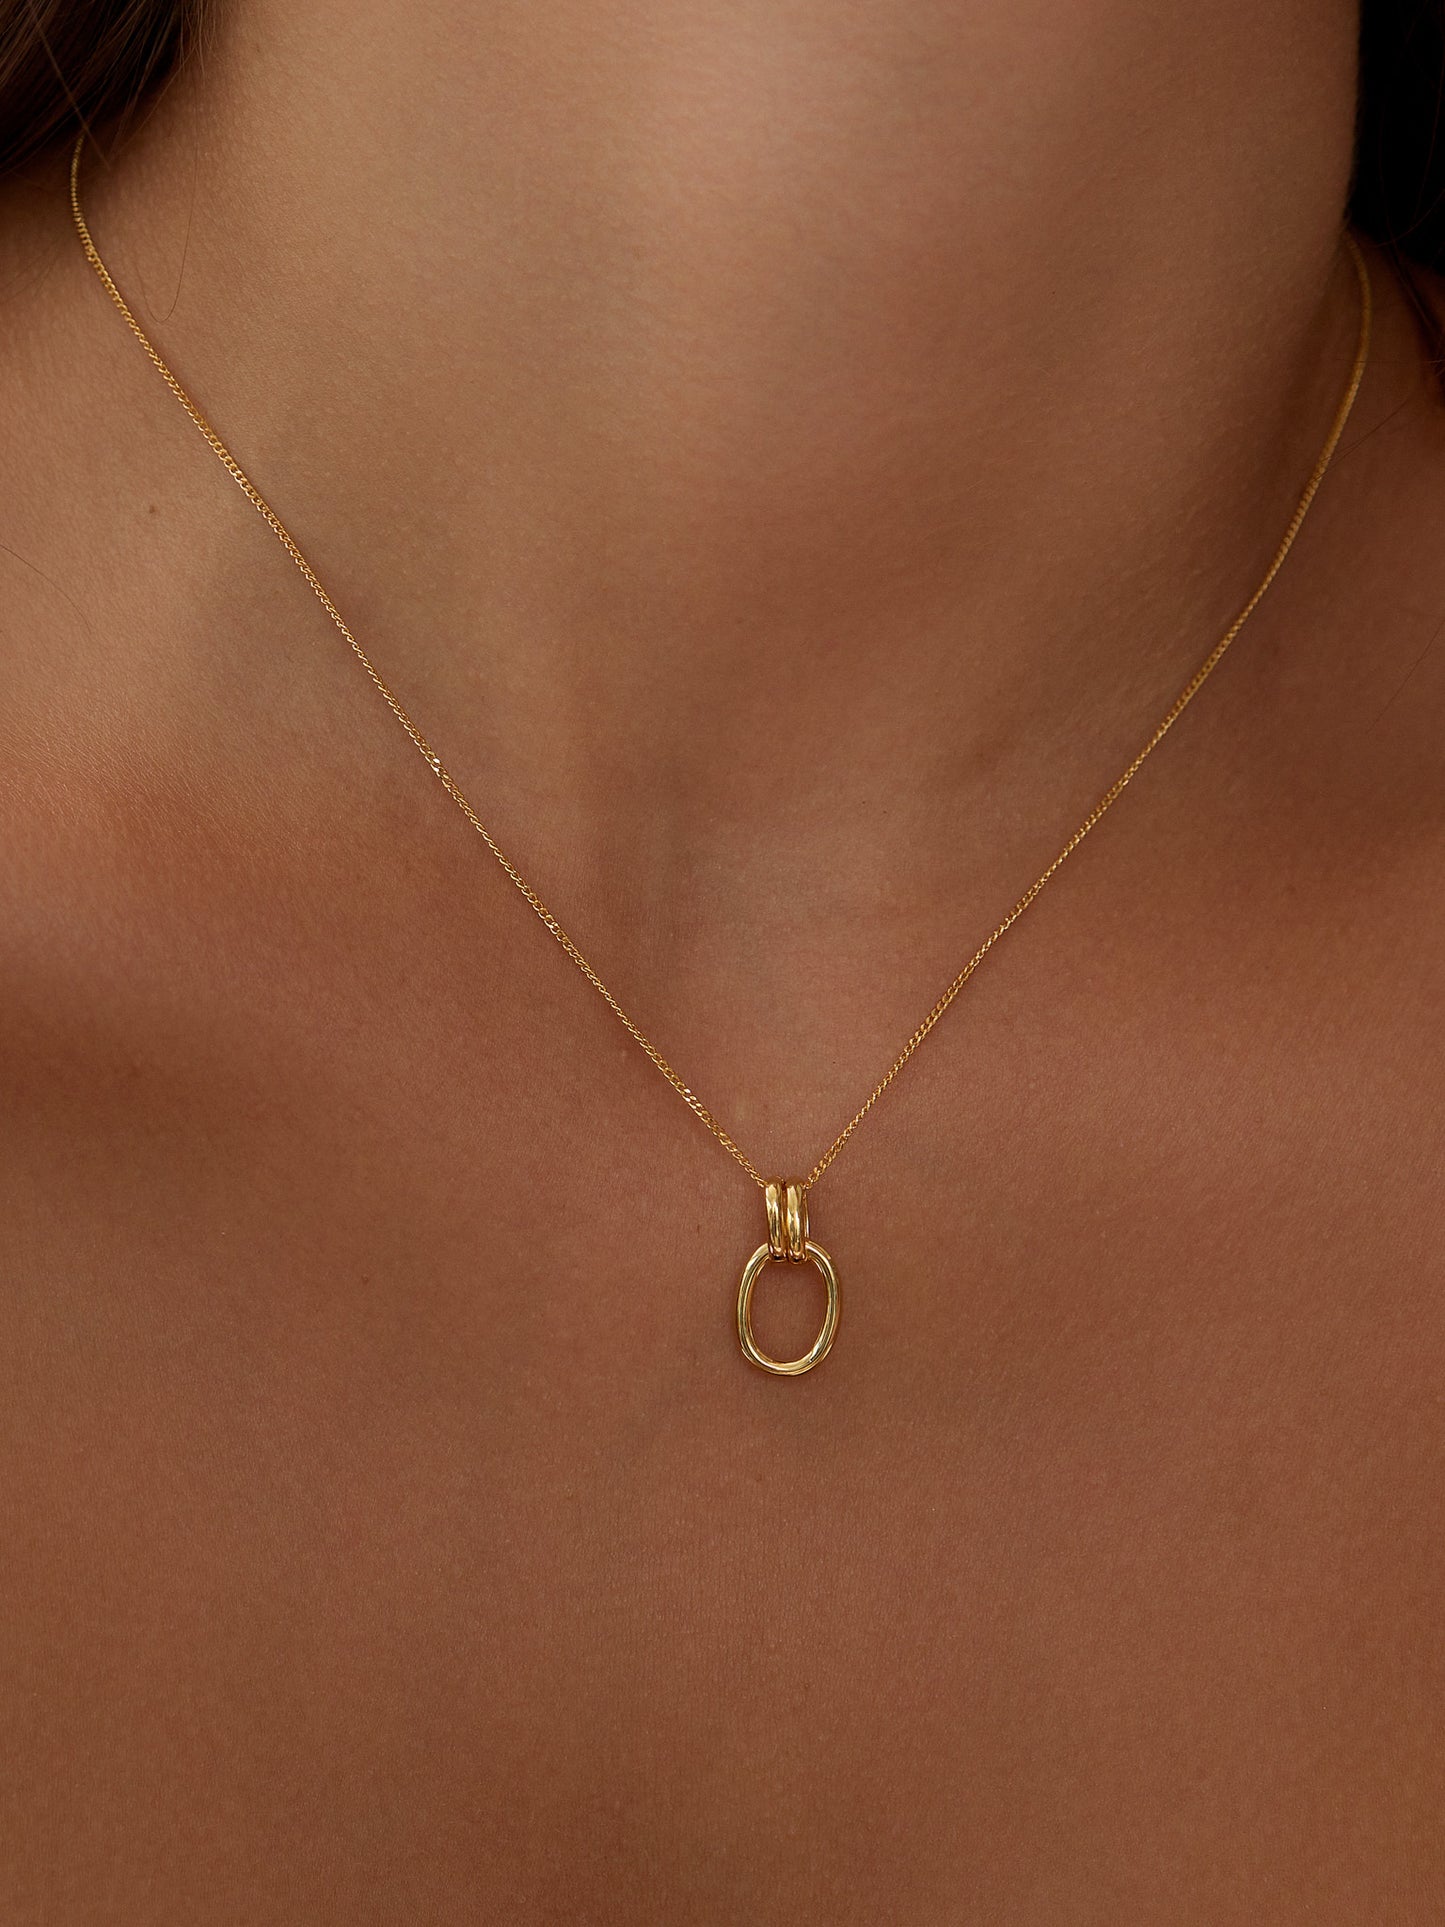 24k Gold Plated Silver Lock Necklace